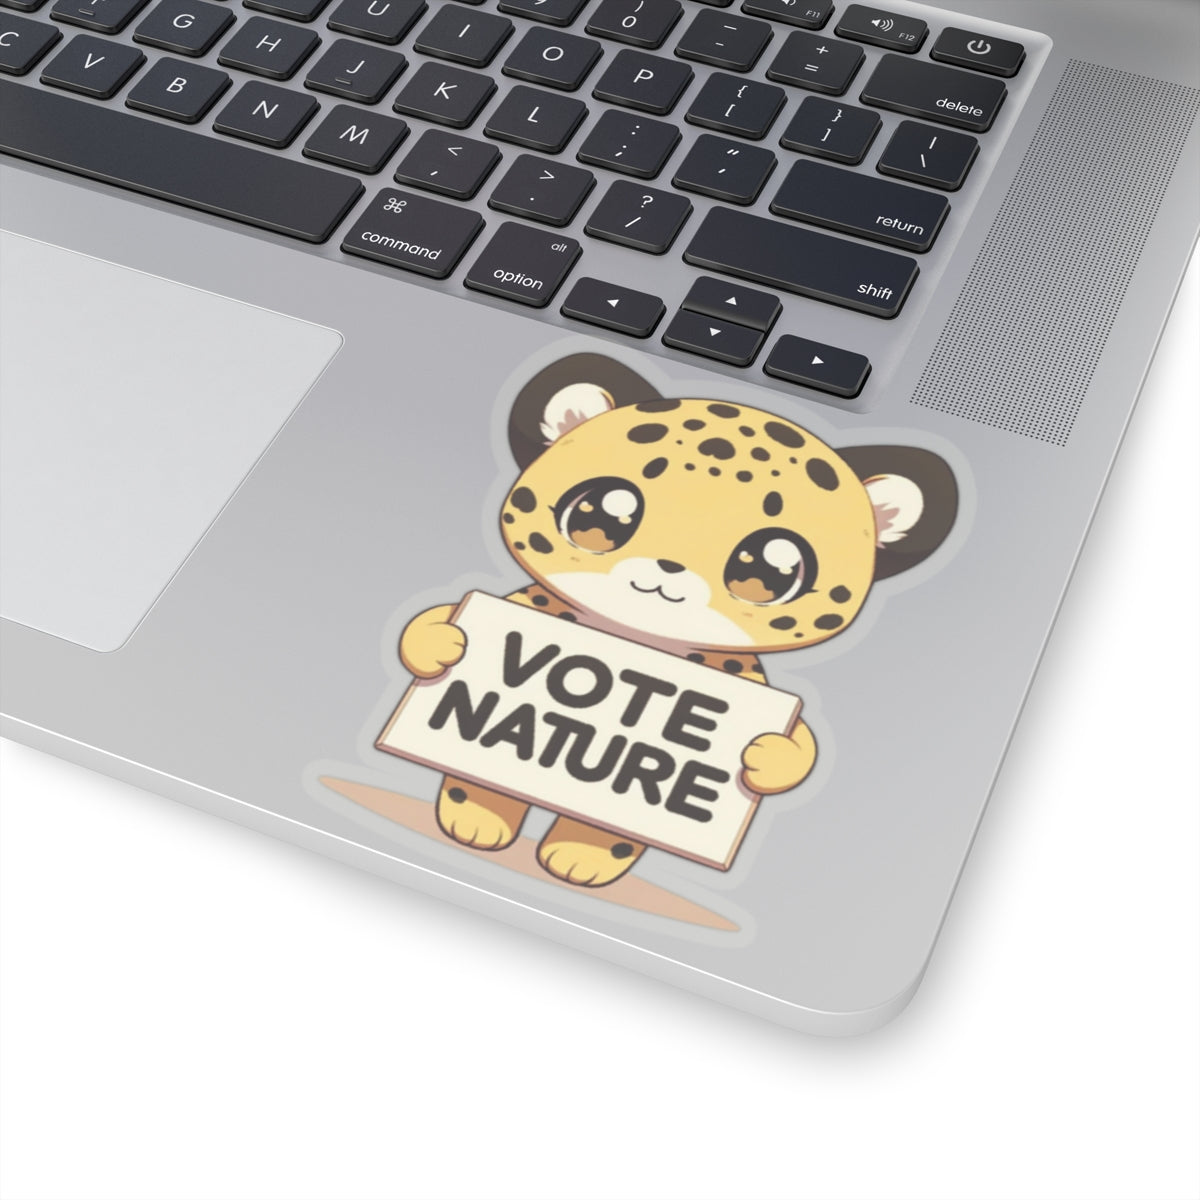 Inspirational Cute Leopard Statement vinyl Sticker: Vote Nature! for laptop, kindle, phone, ipad, instrument case, notebook, mood board